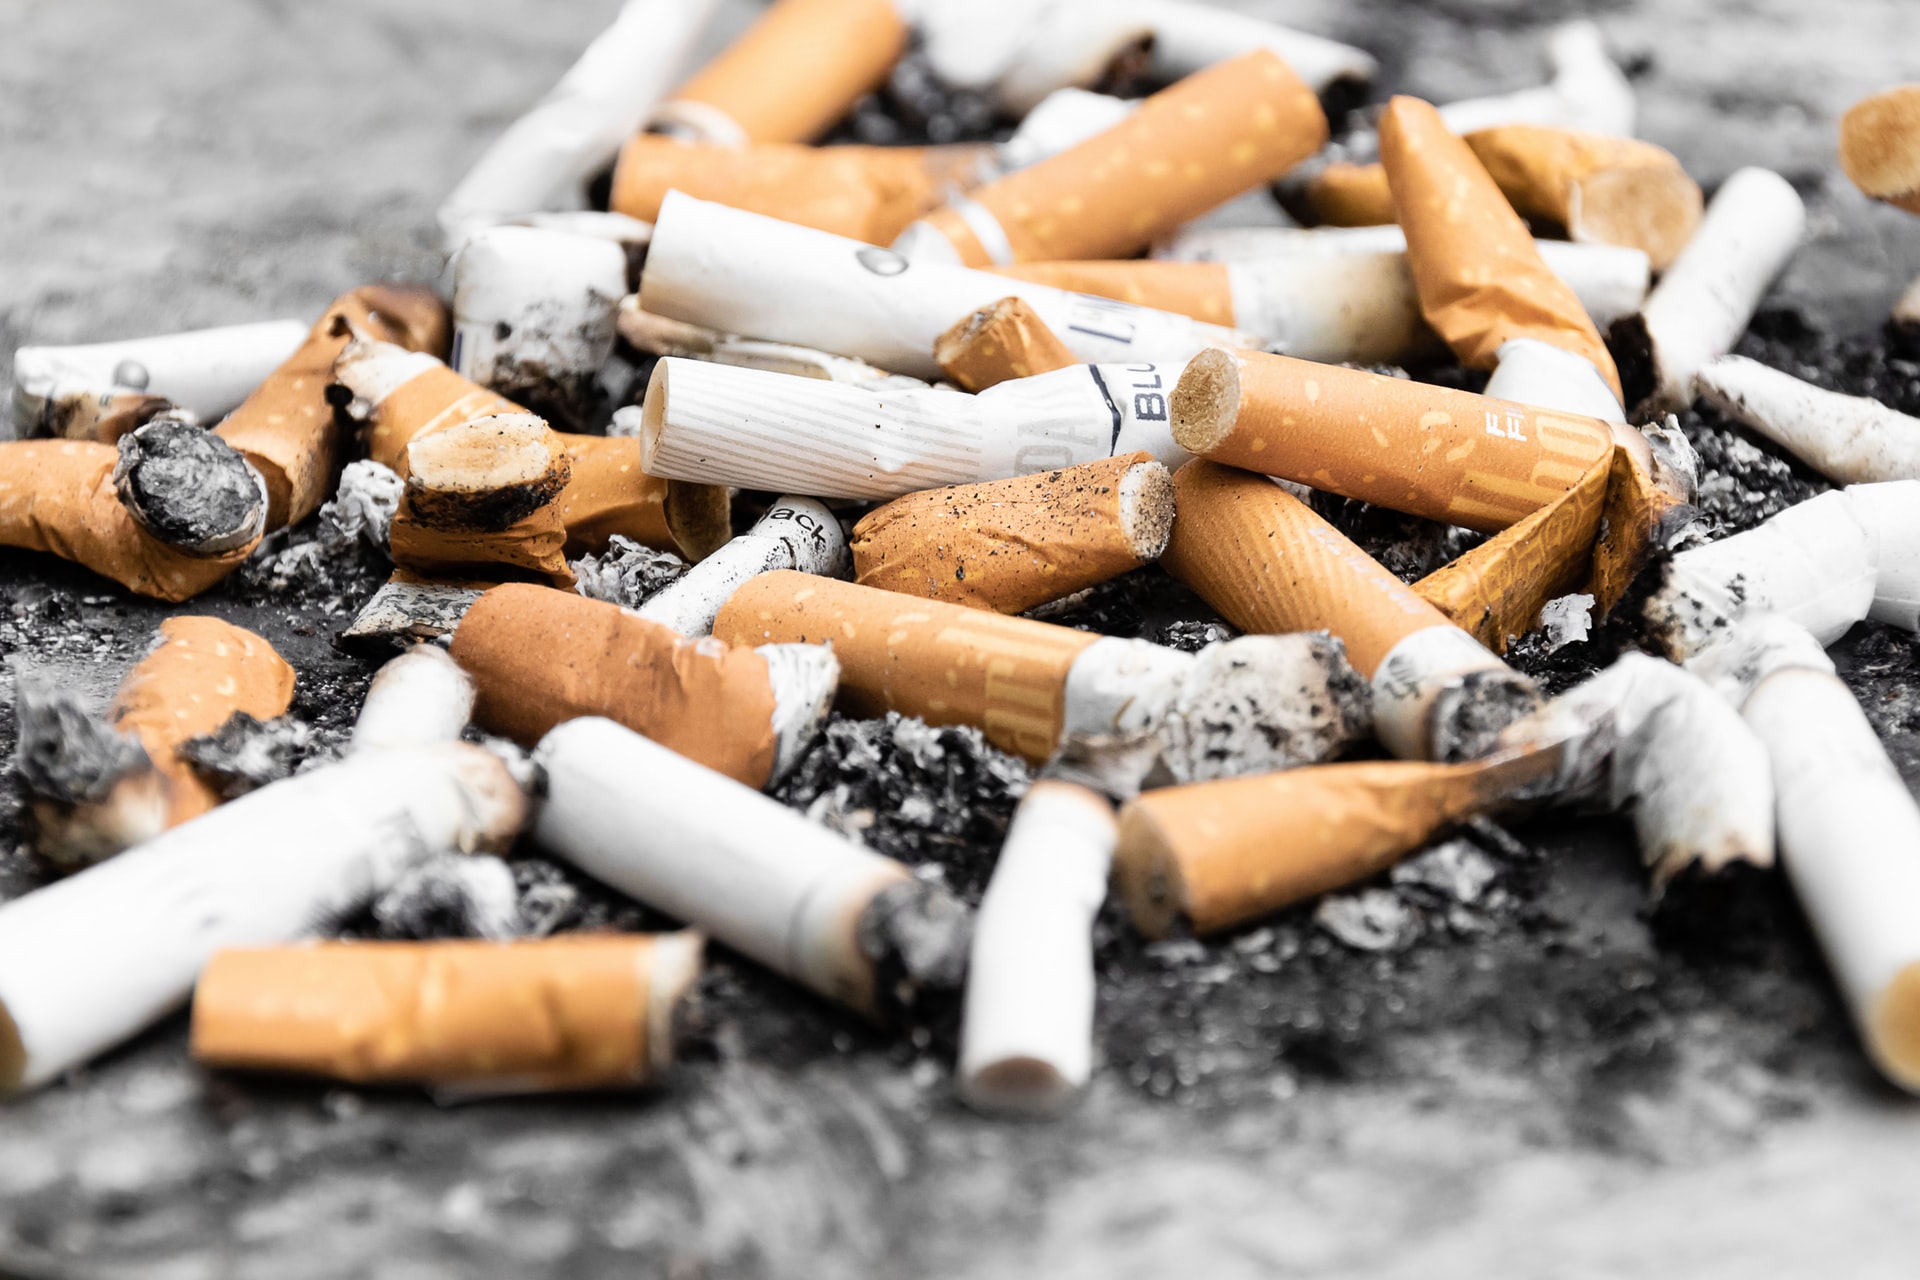 Contrary to what many believe, cigarette butts are not harmless. They are made of cellulose acetate, a man-made plastic material, and contain hundreds of toxic chemicals.